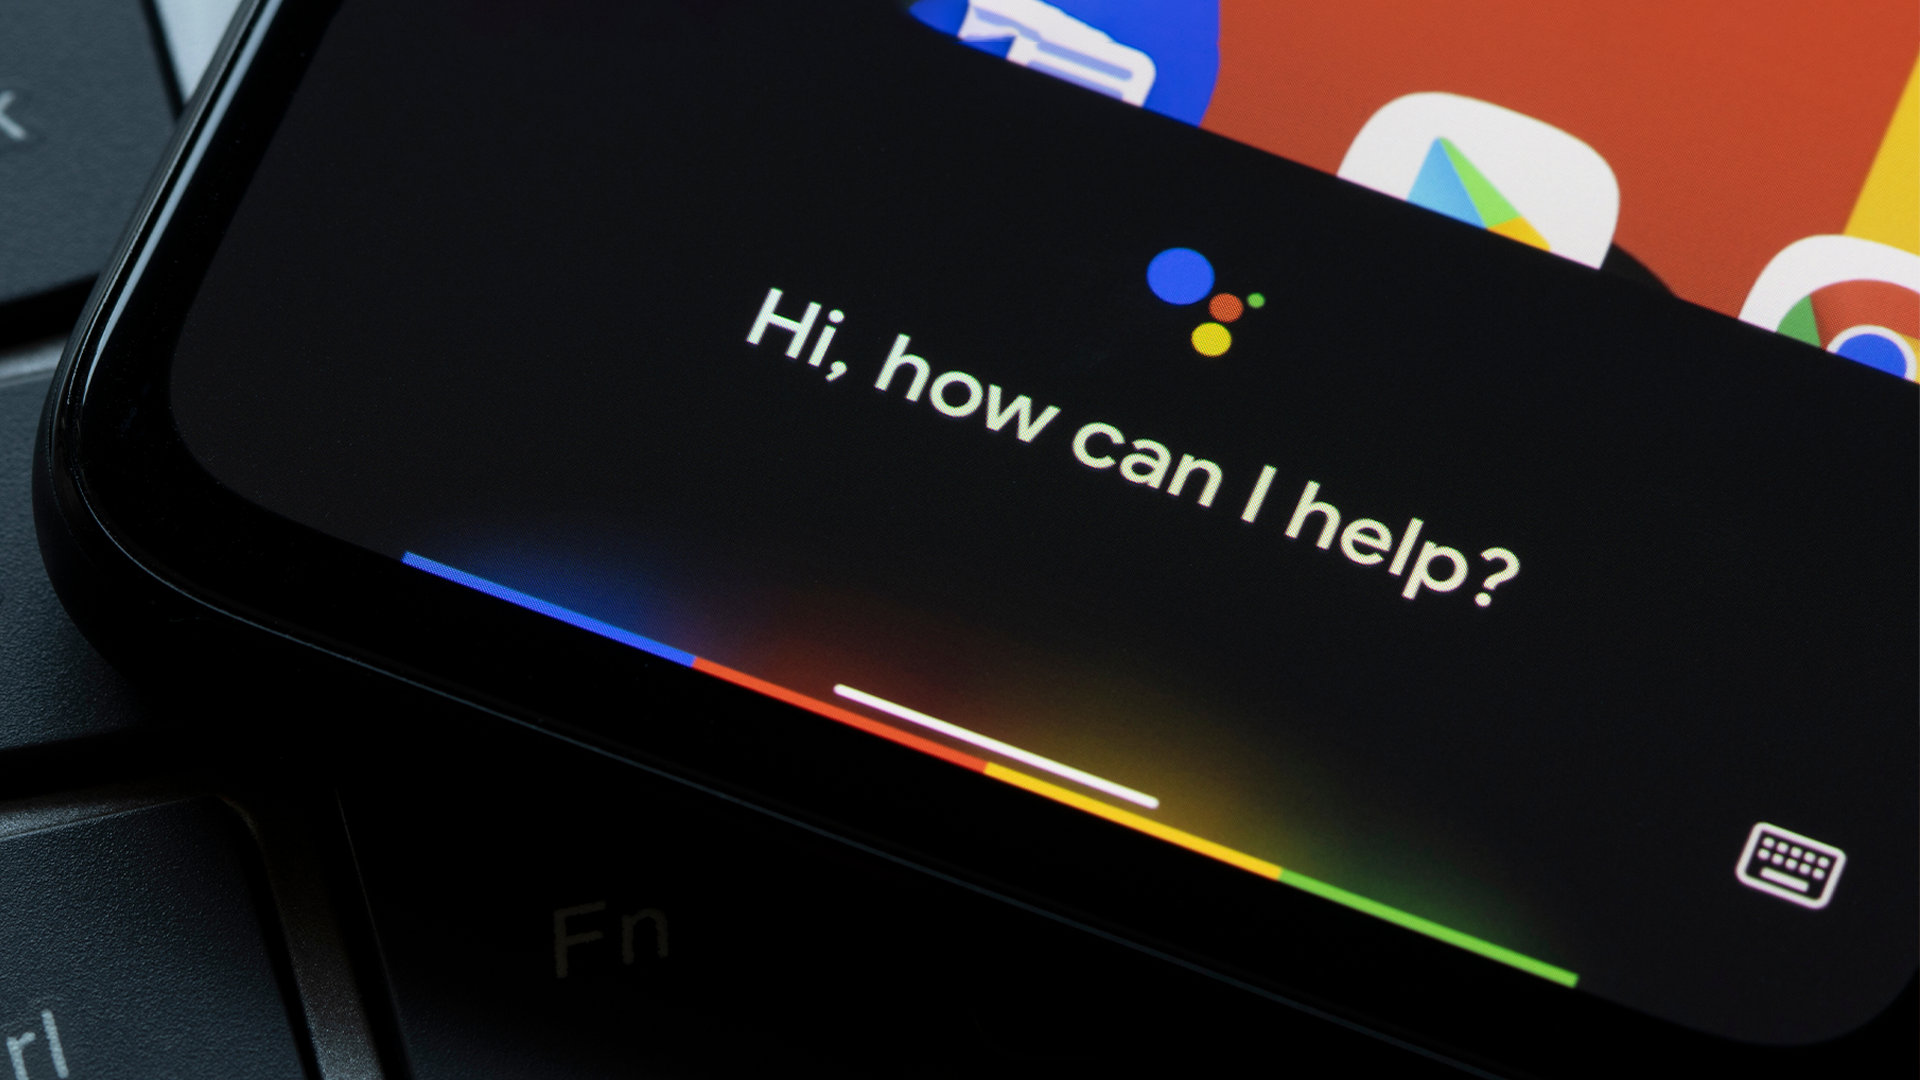 Google Assistant running on a smartphone.